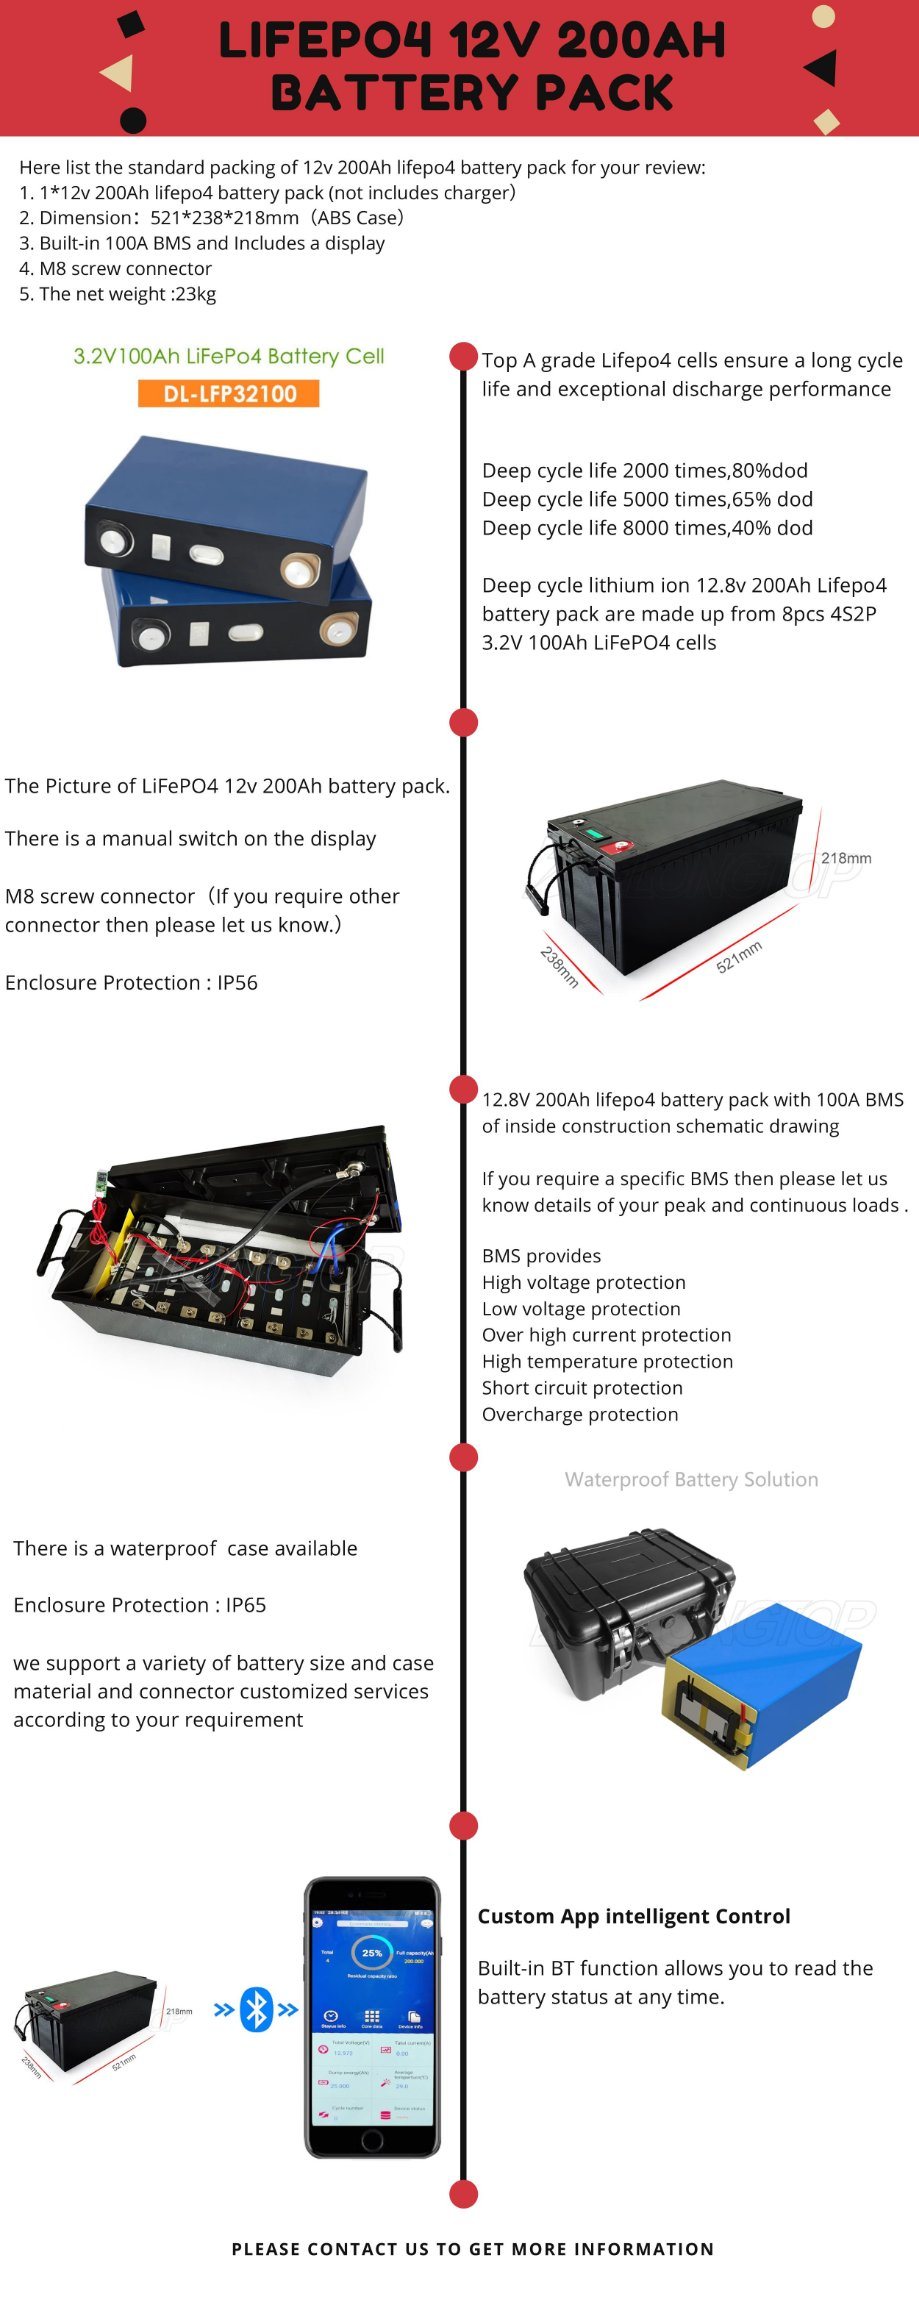 Sale Promotion 10% Lithium Solar Battery 12V 200ah LiFePO4 Battery with 3.2V 50ah Pouch Cell